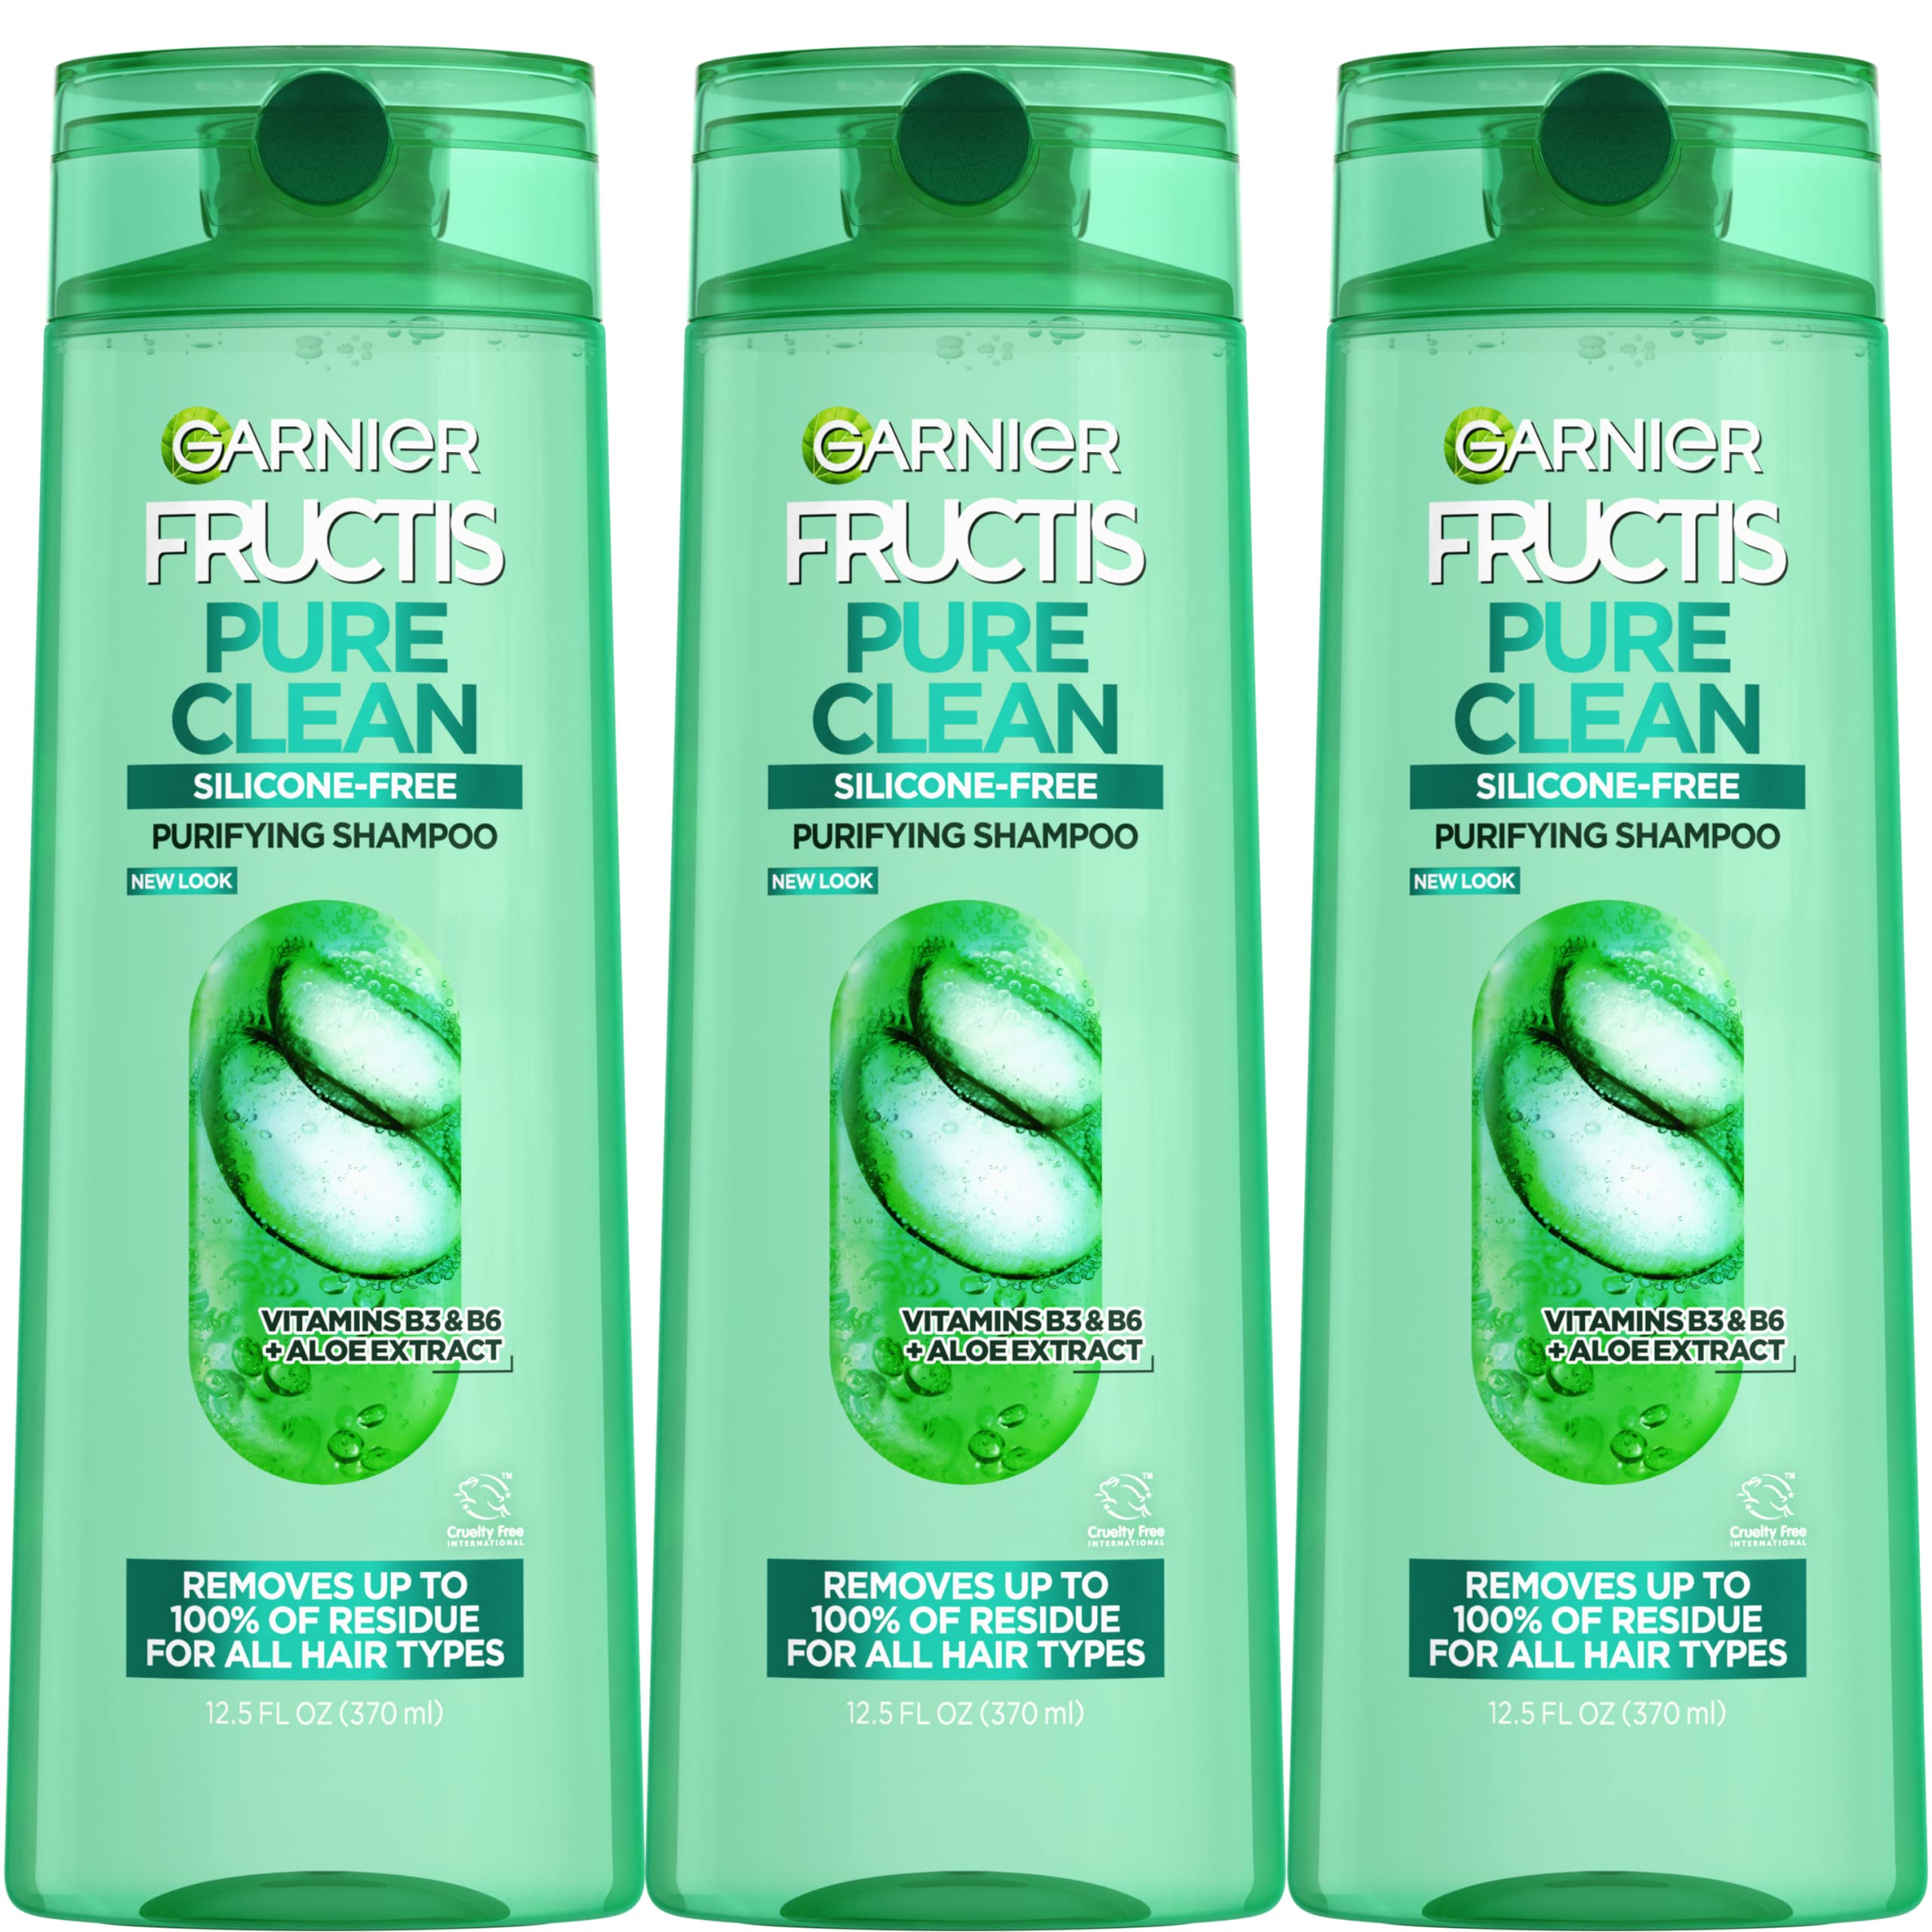 3-Count 12.5-Oz Garnier Hair Care Fructis Pure Clean Shampoo  $7.15 w/ S&S + Free Shipping w/ Prime or on $25+